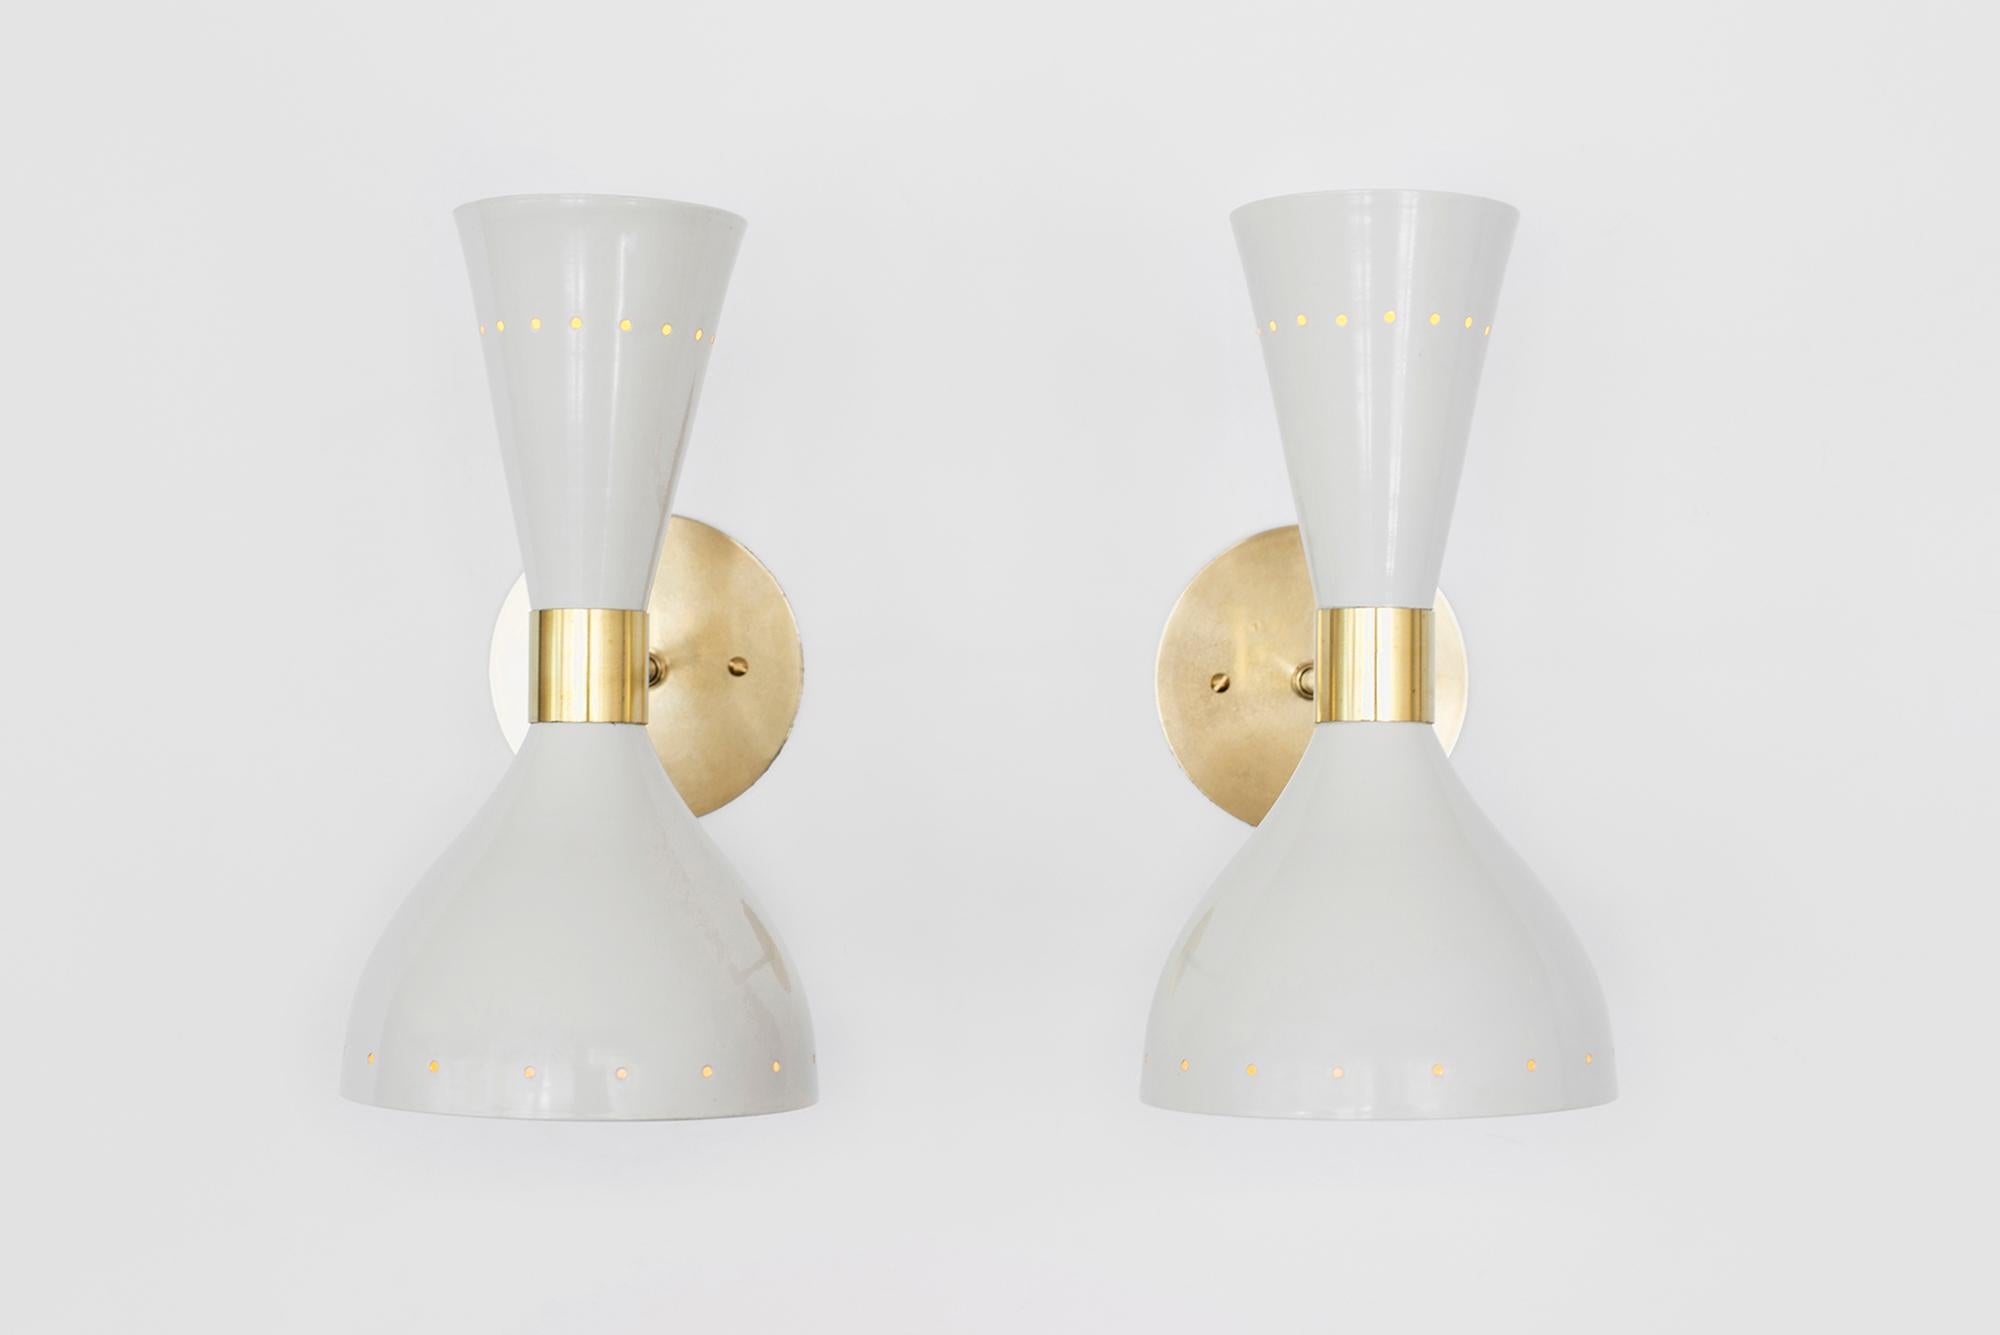 Great pair of Italian metal sconces in the style of Stilnovo, newly produced in Italy. Off-white metal shade with brass detailing and back-plate. Sconces shine both up and down light. Wired to American standards.
 